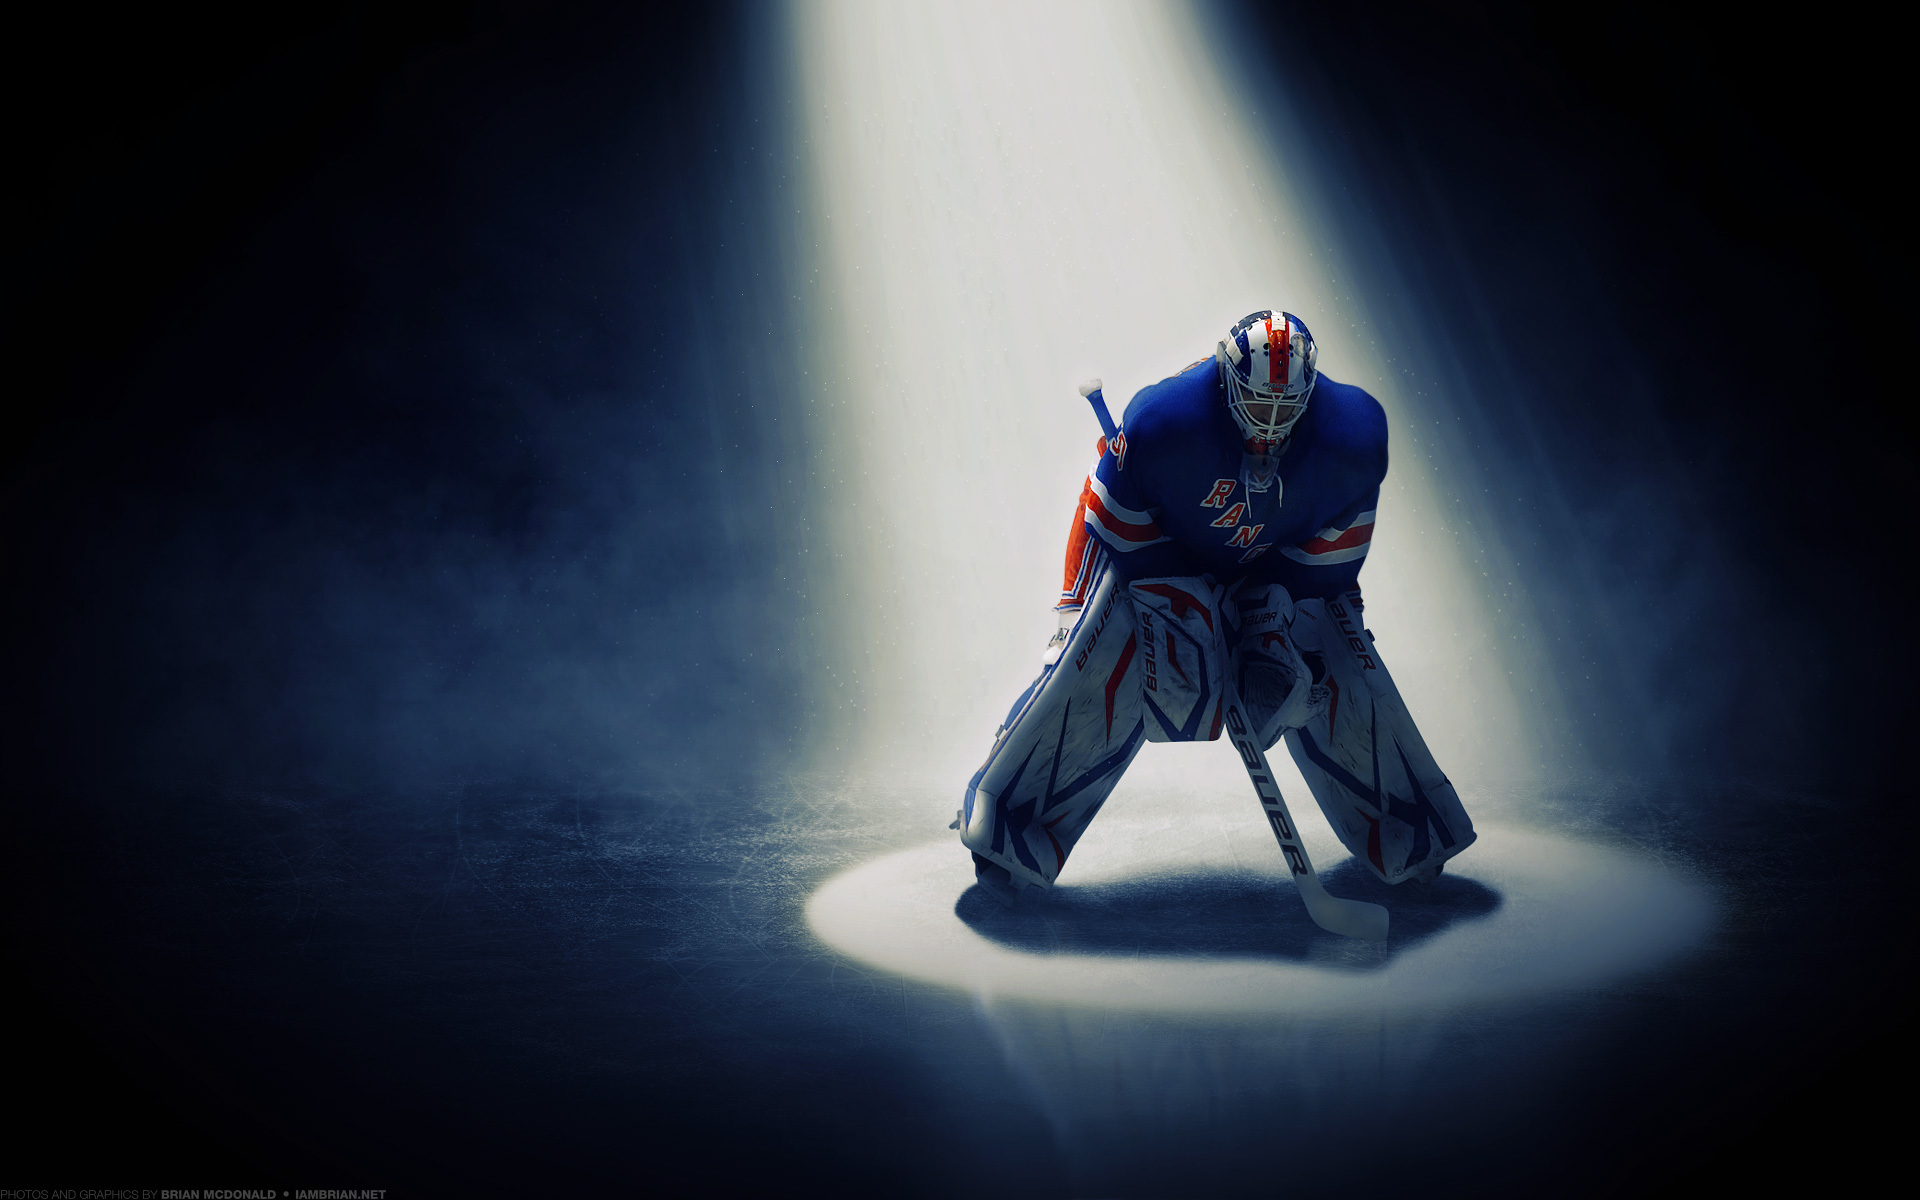  Henrik Lundqvist wallpapers and images   wallpapers pictures photos 1920x1200